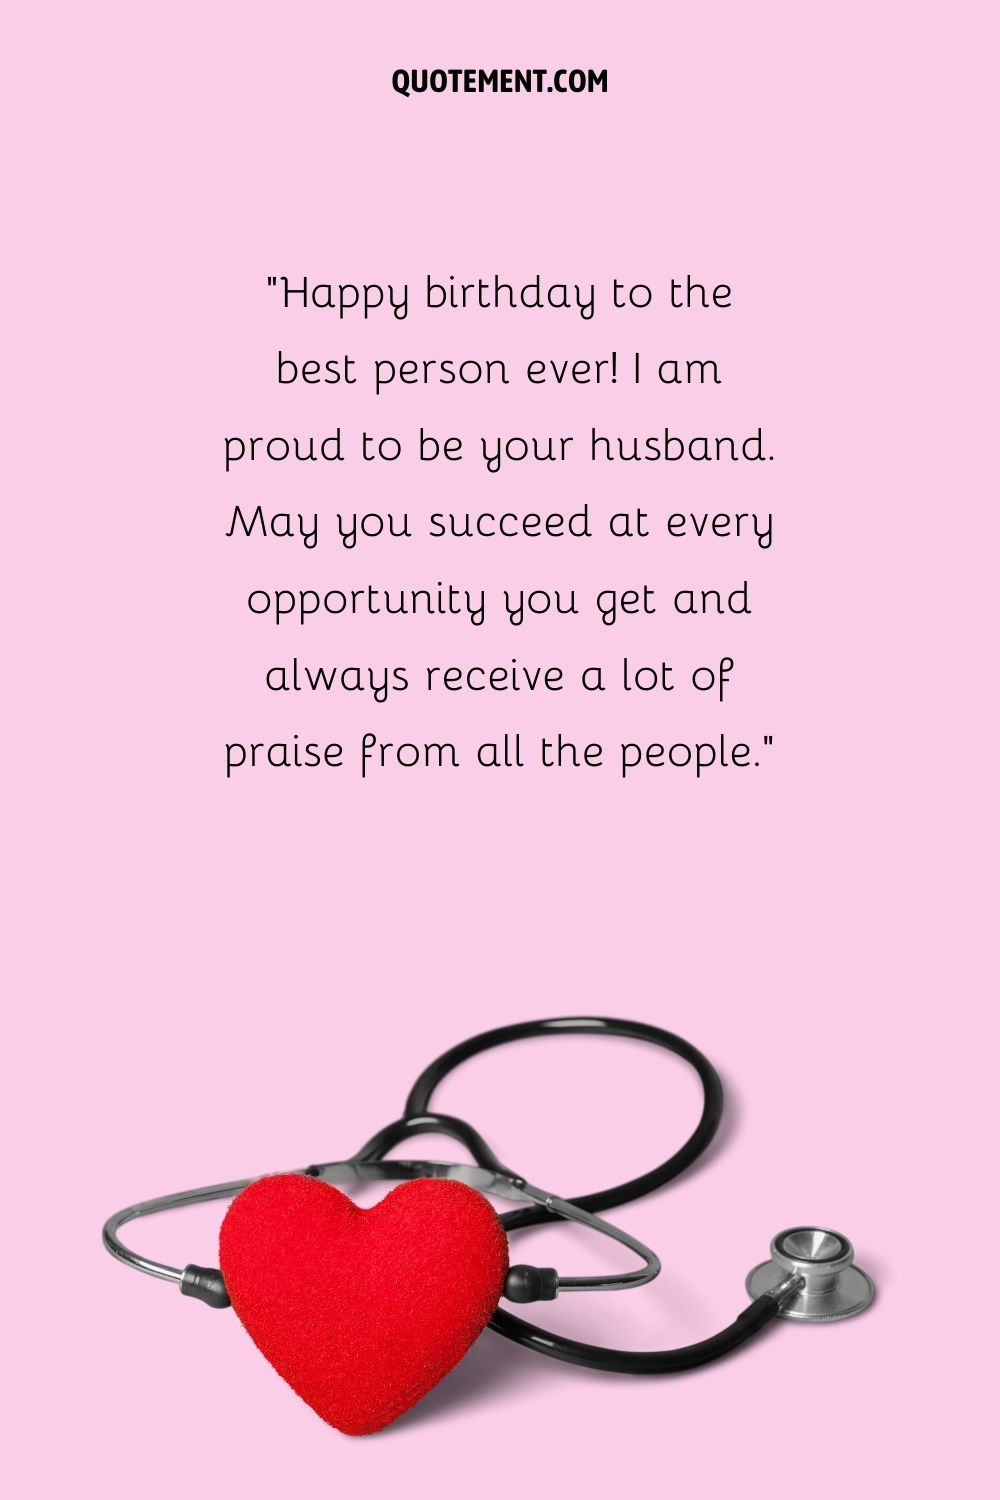 stethoscope and a red heart representingbirthday msg for doctor